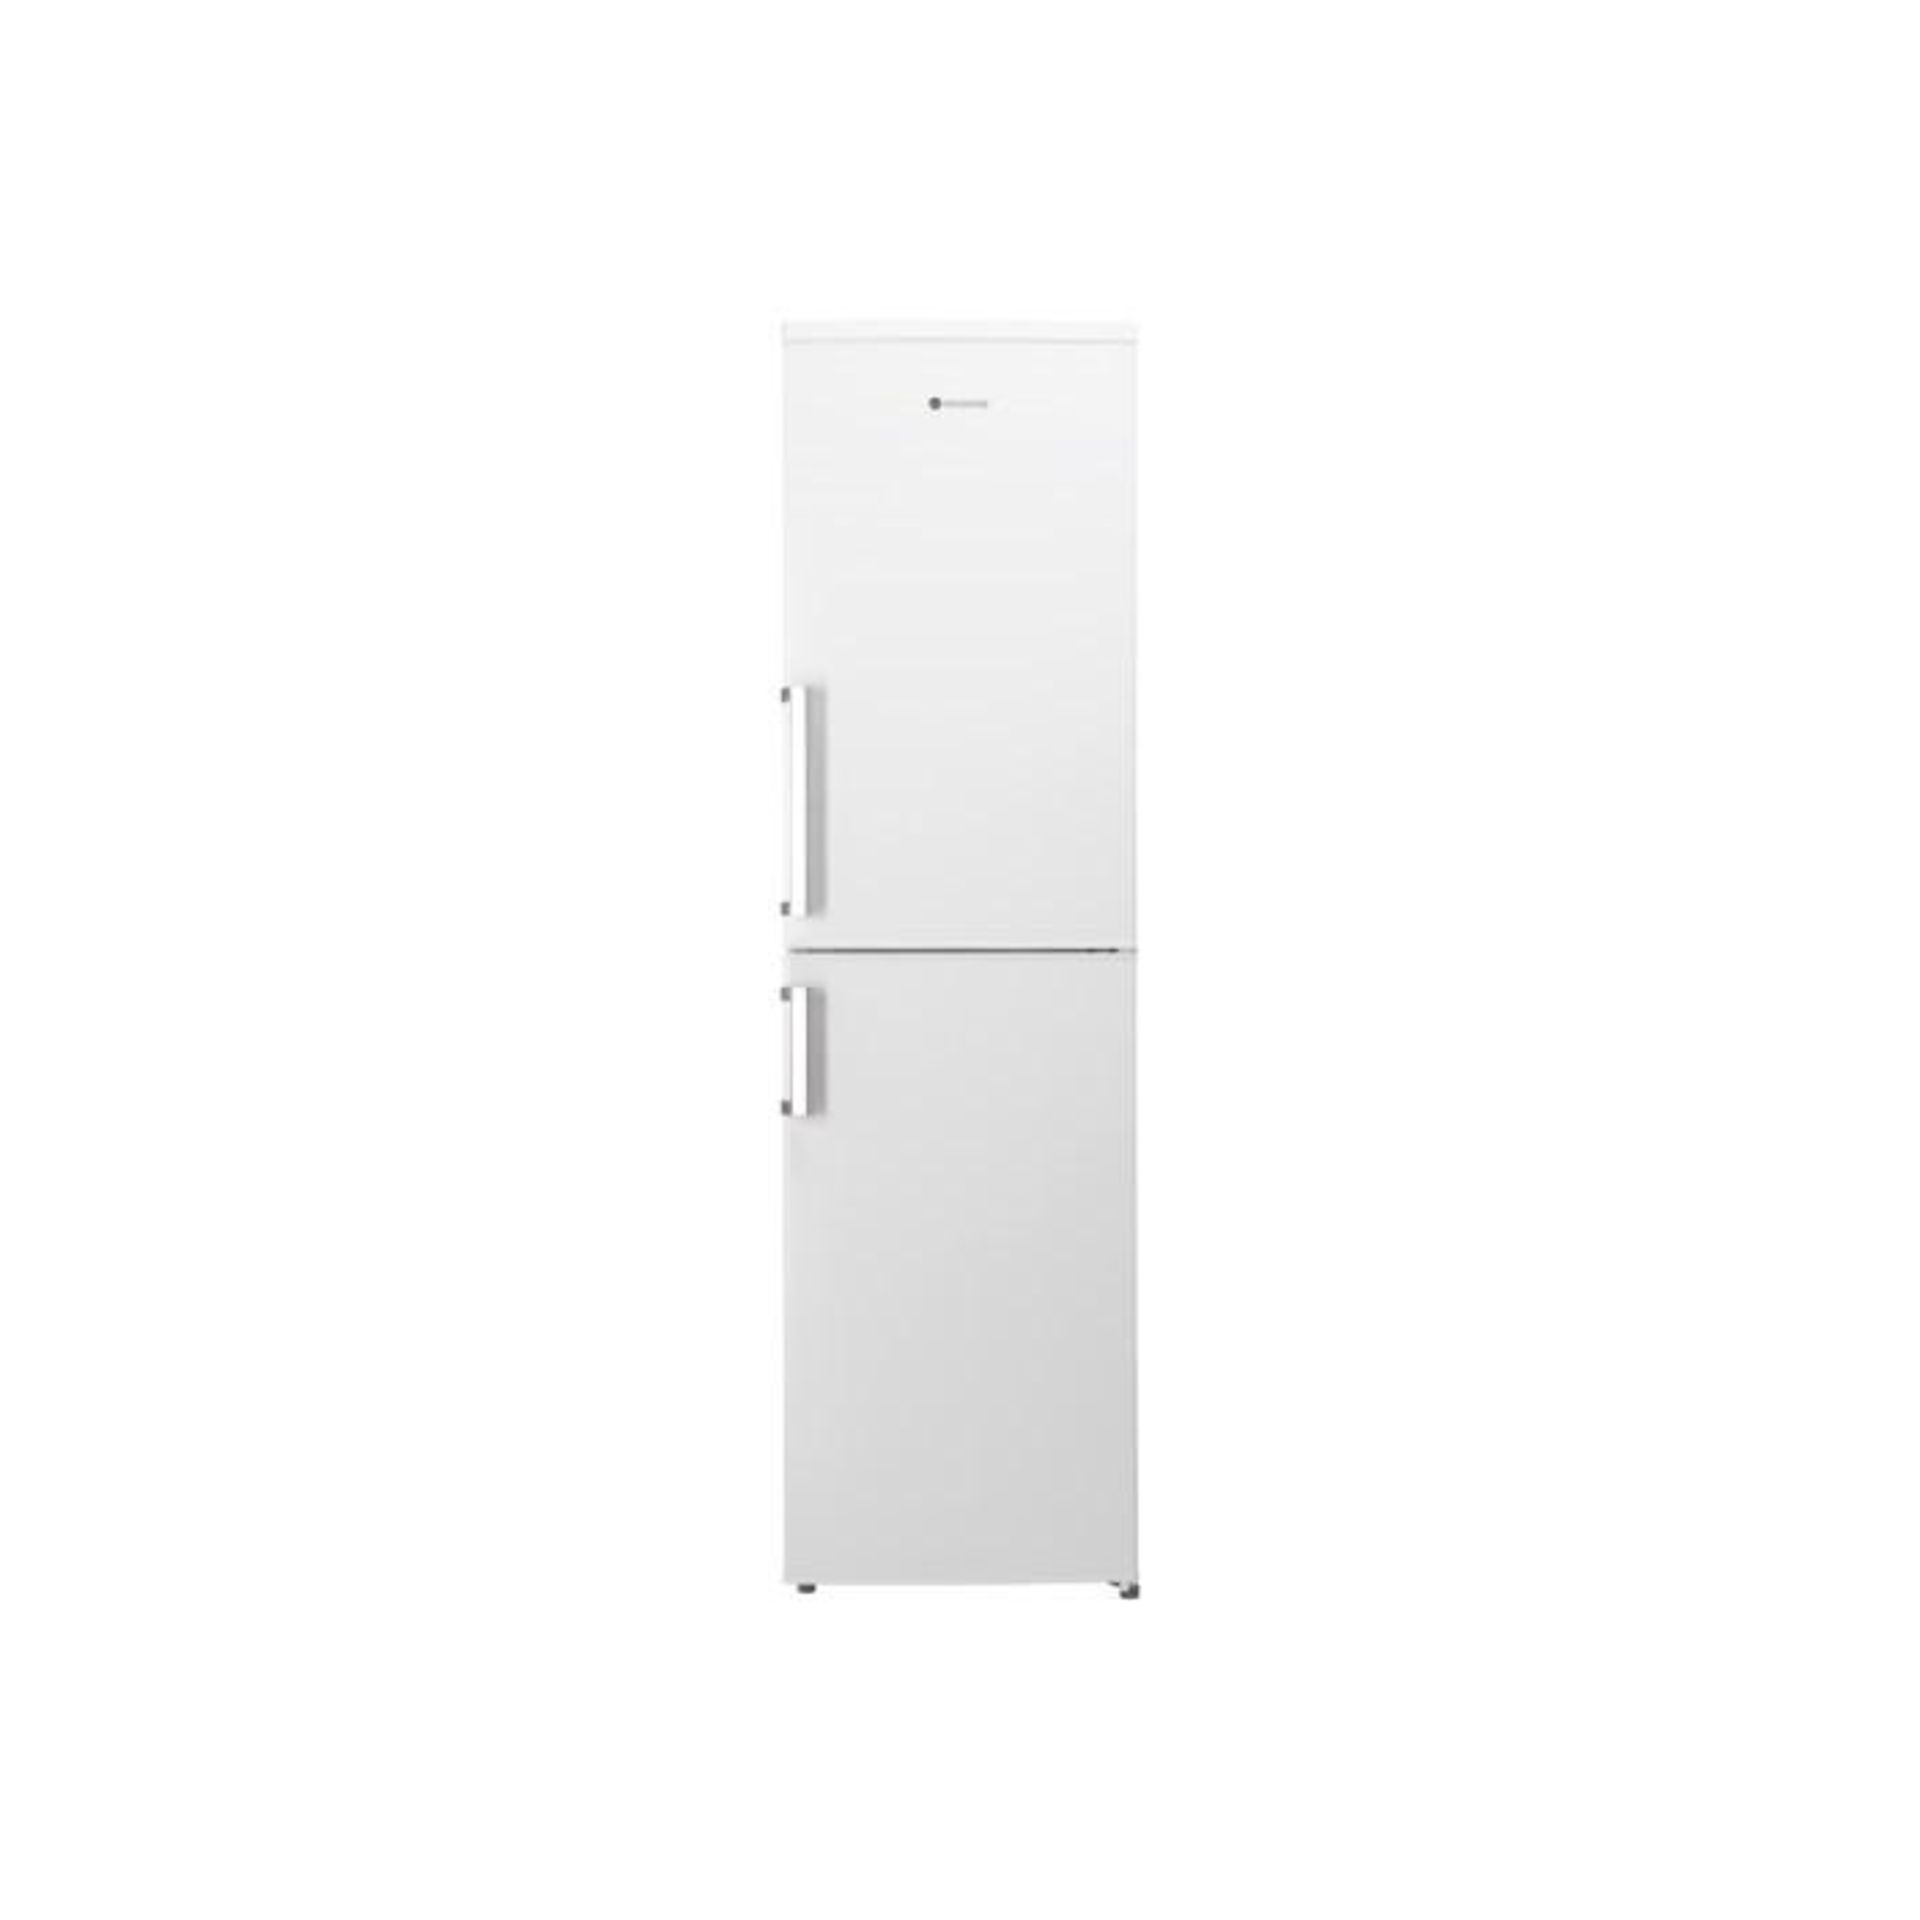 Mixed Lot of Seven Refurbished Appliances including Beko Tall Freezer in Black, BrightHouse model - Image 6 of 7